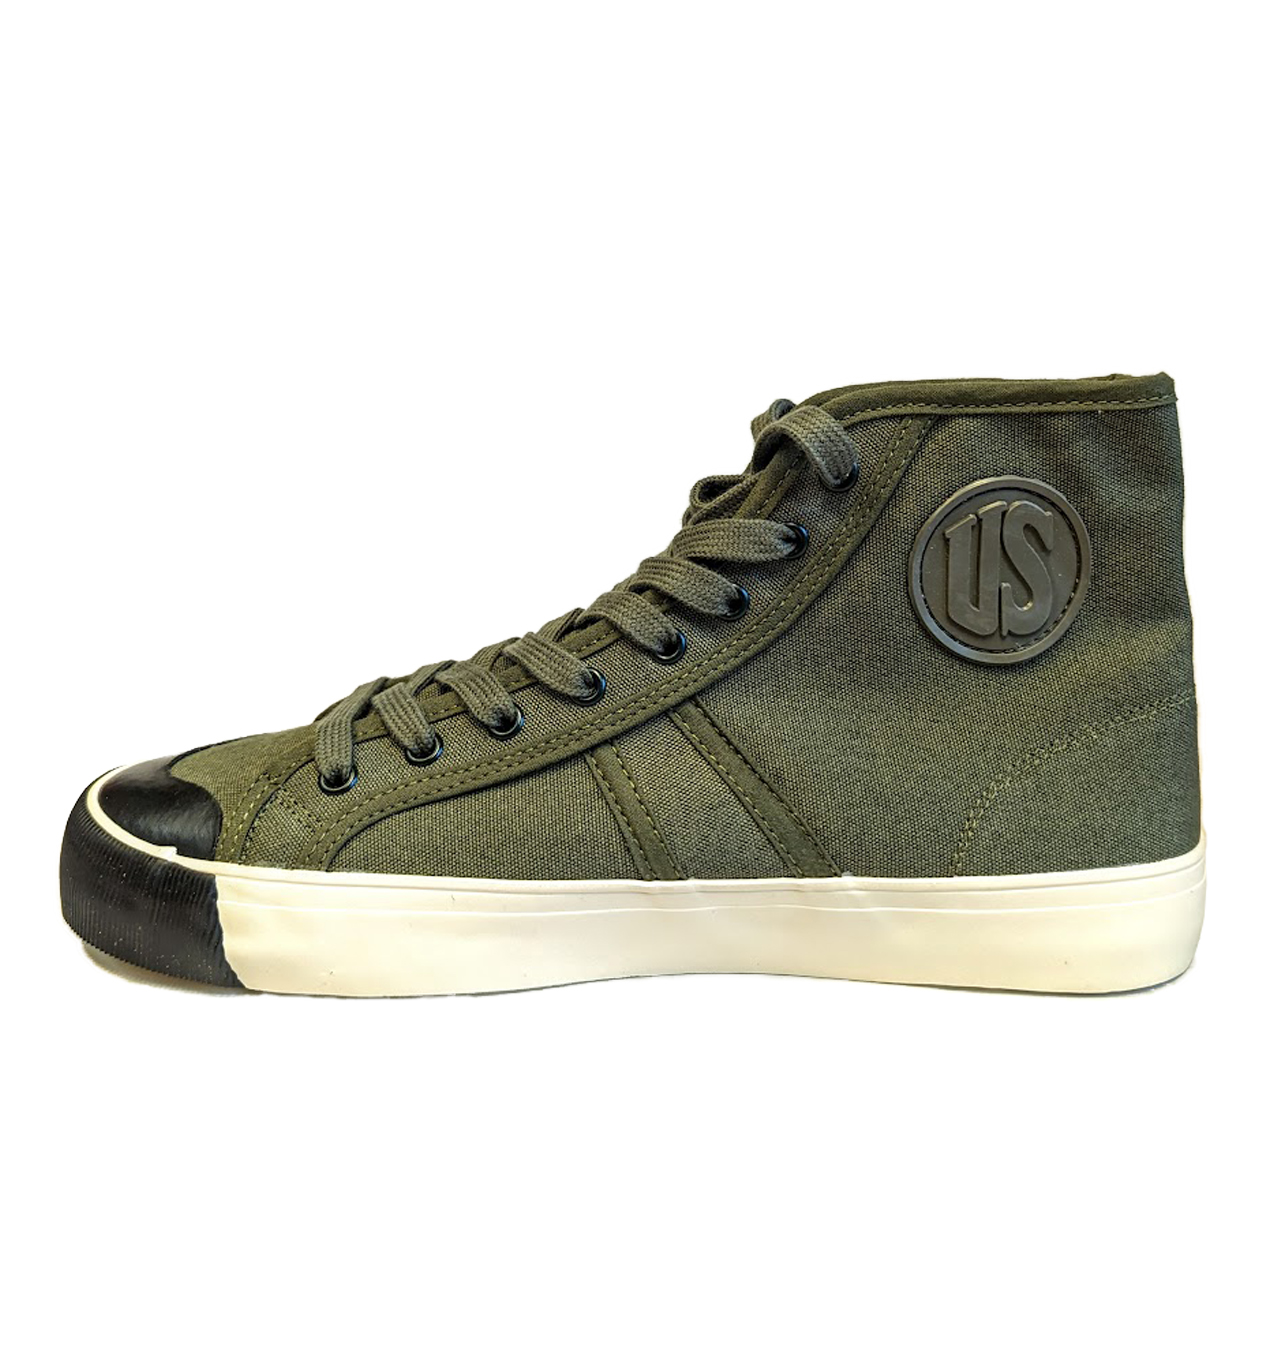 Colchester By US Rubber Co - High Top Canvas Sneaker - Military Green